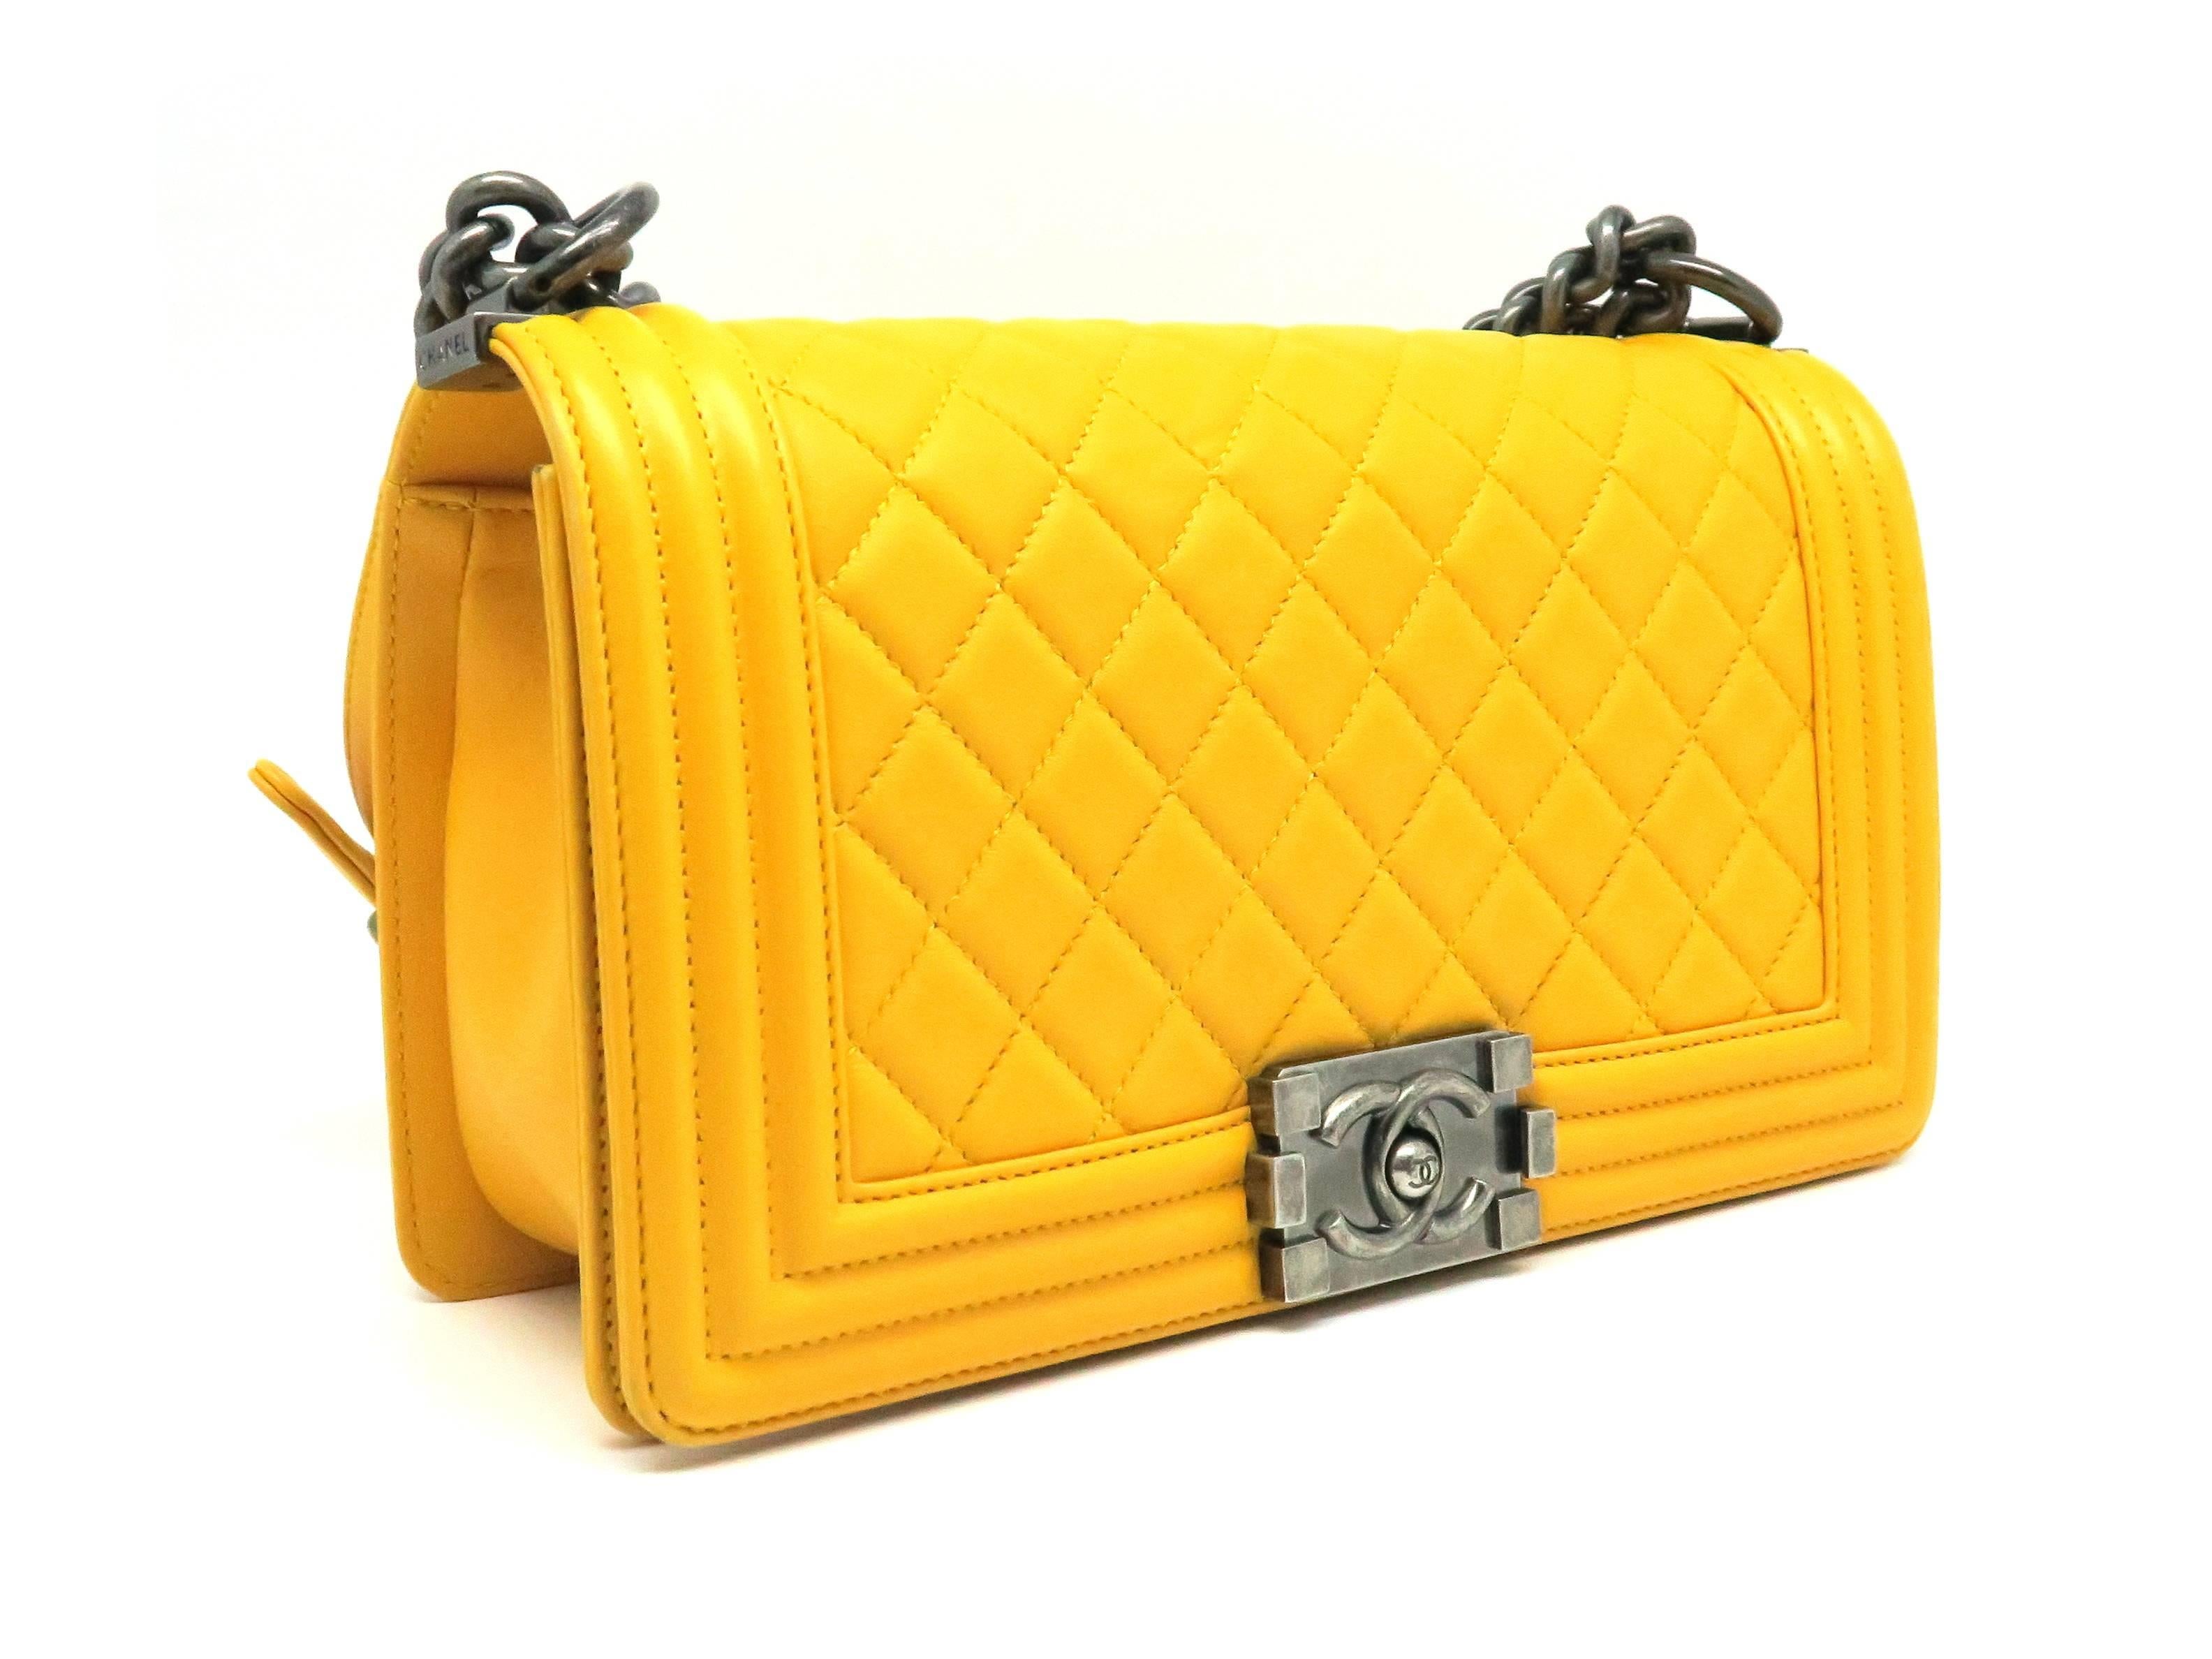 Color: Yellow 

Material: Quilted Calfskin Leather

Condition: Rank A 
Overall: Good, few minor defects
Surface: Minor Scratches & Stains
Corners: Minor Scratches & Stains
Edges: Minor Scratches
Handles/Straps: Good
Hardware: